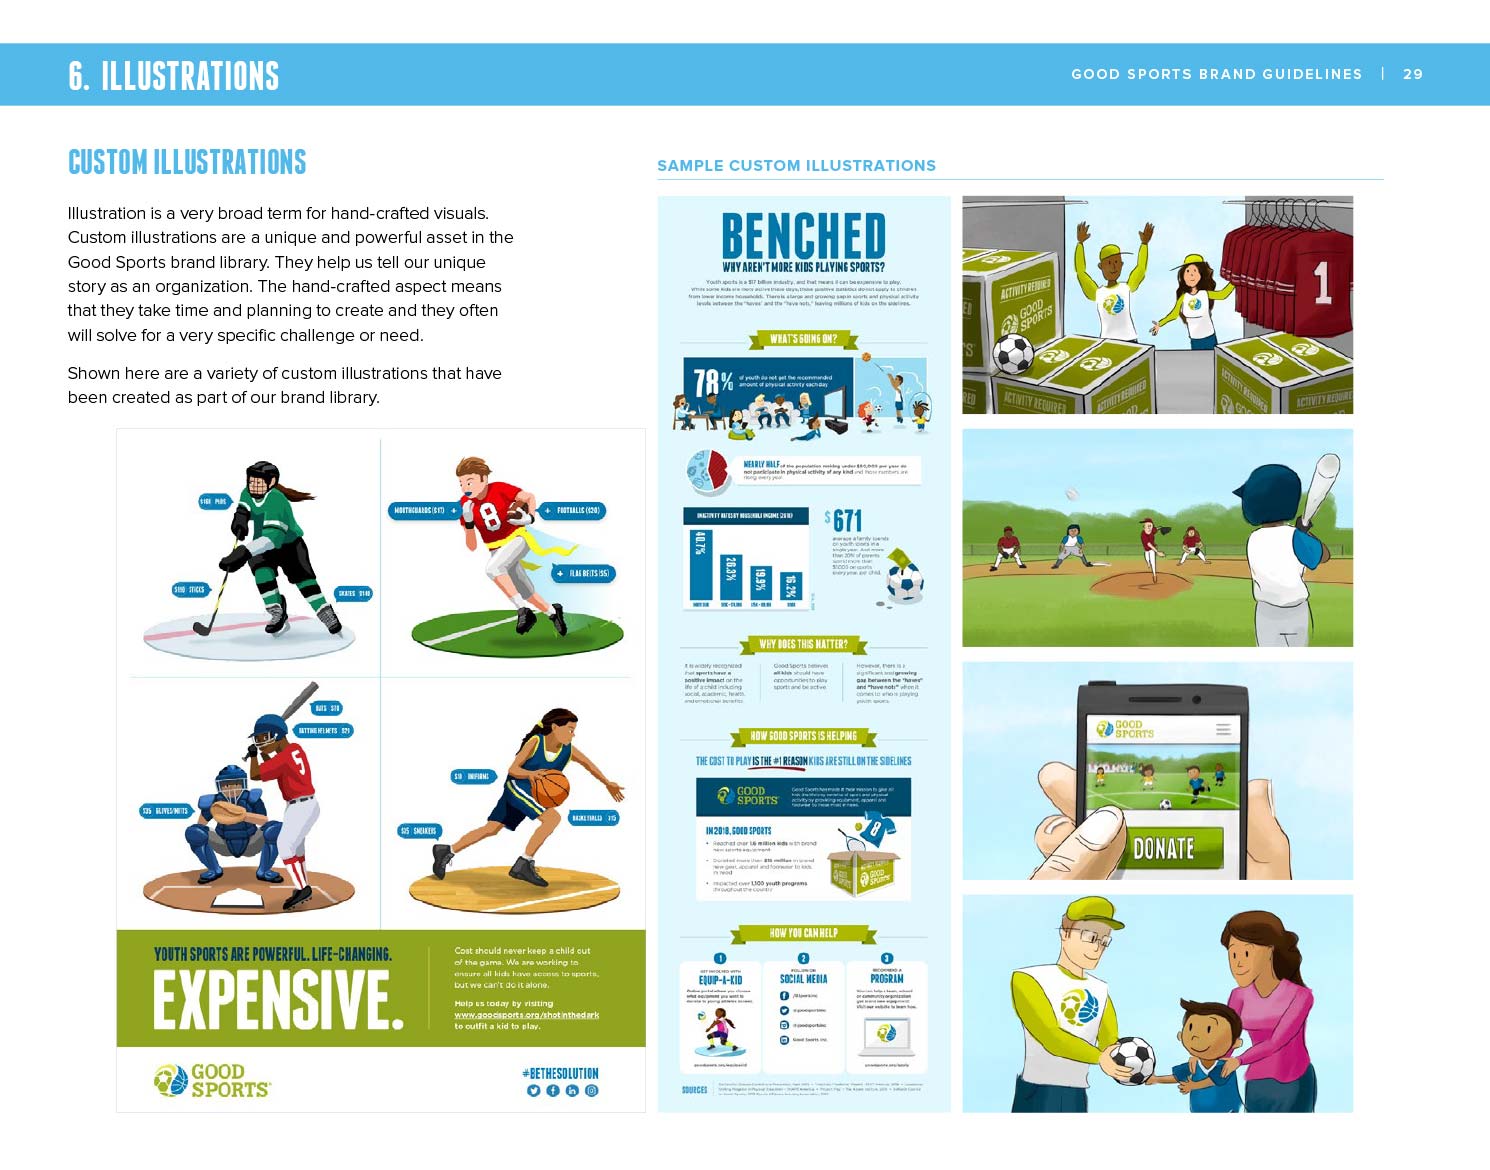 Good Sports Brand Guide showing illustration guidelines